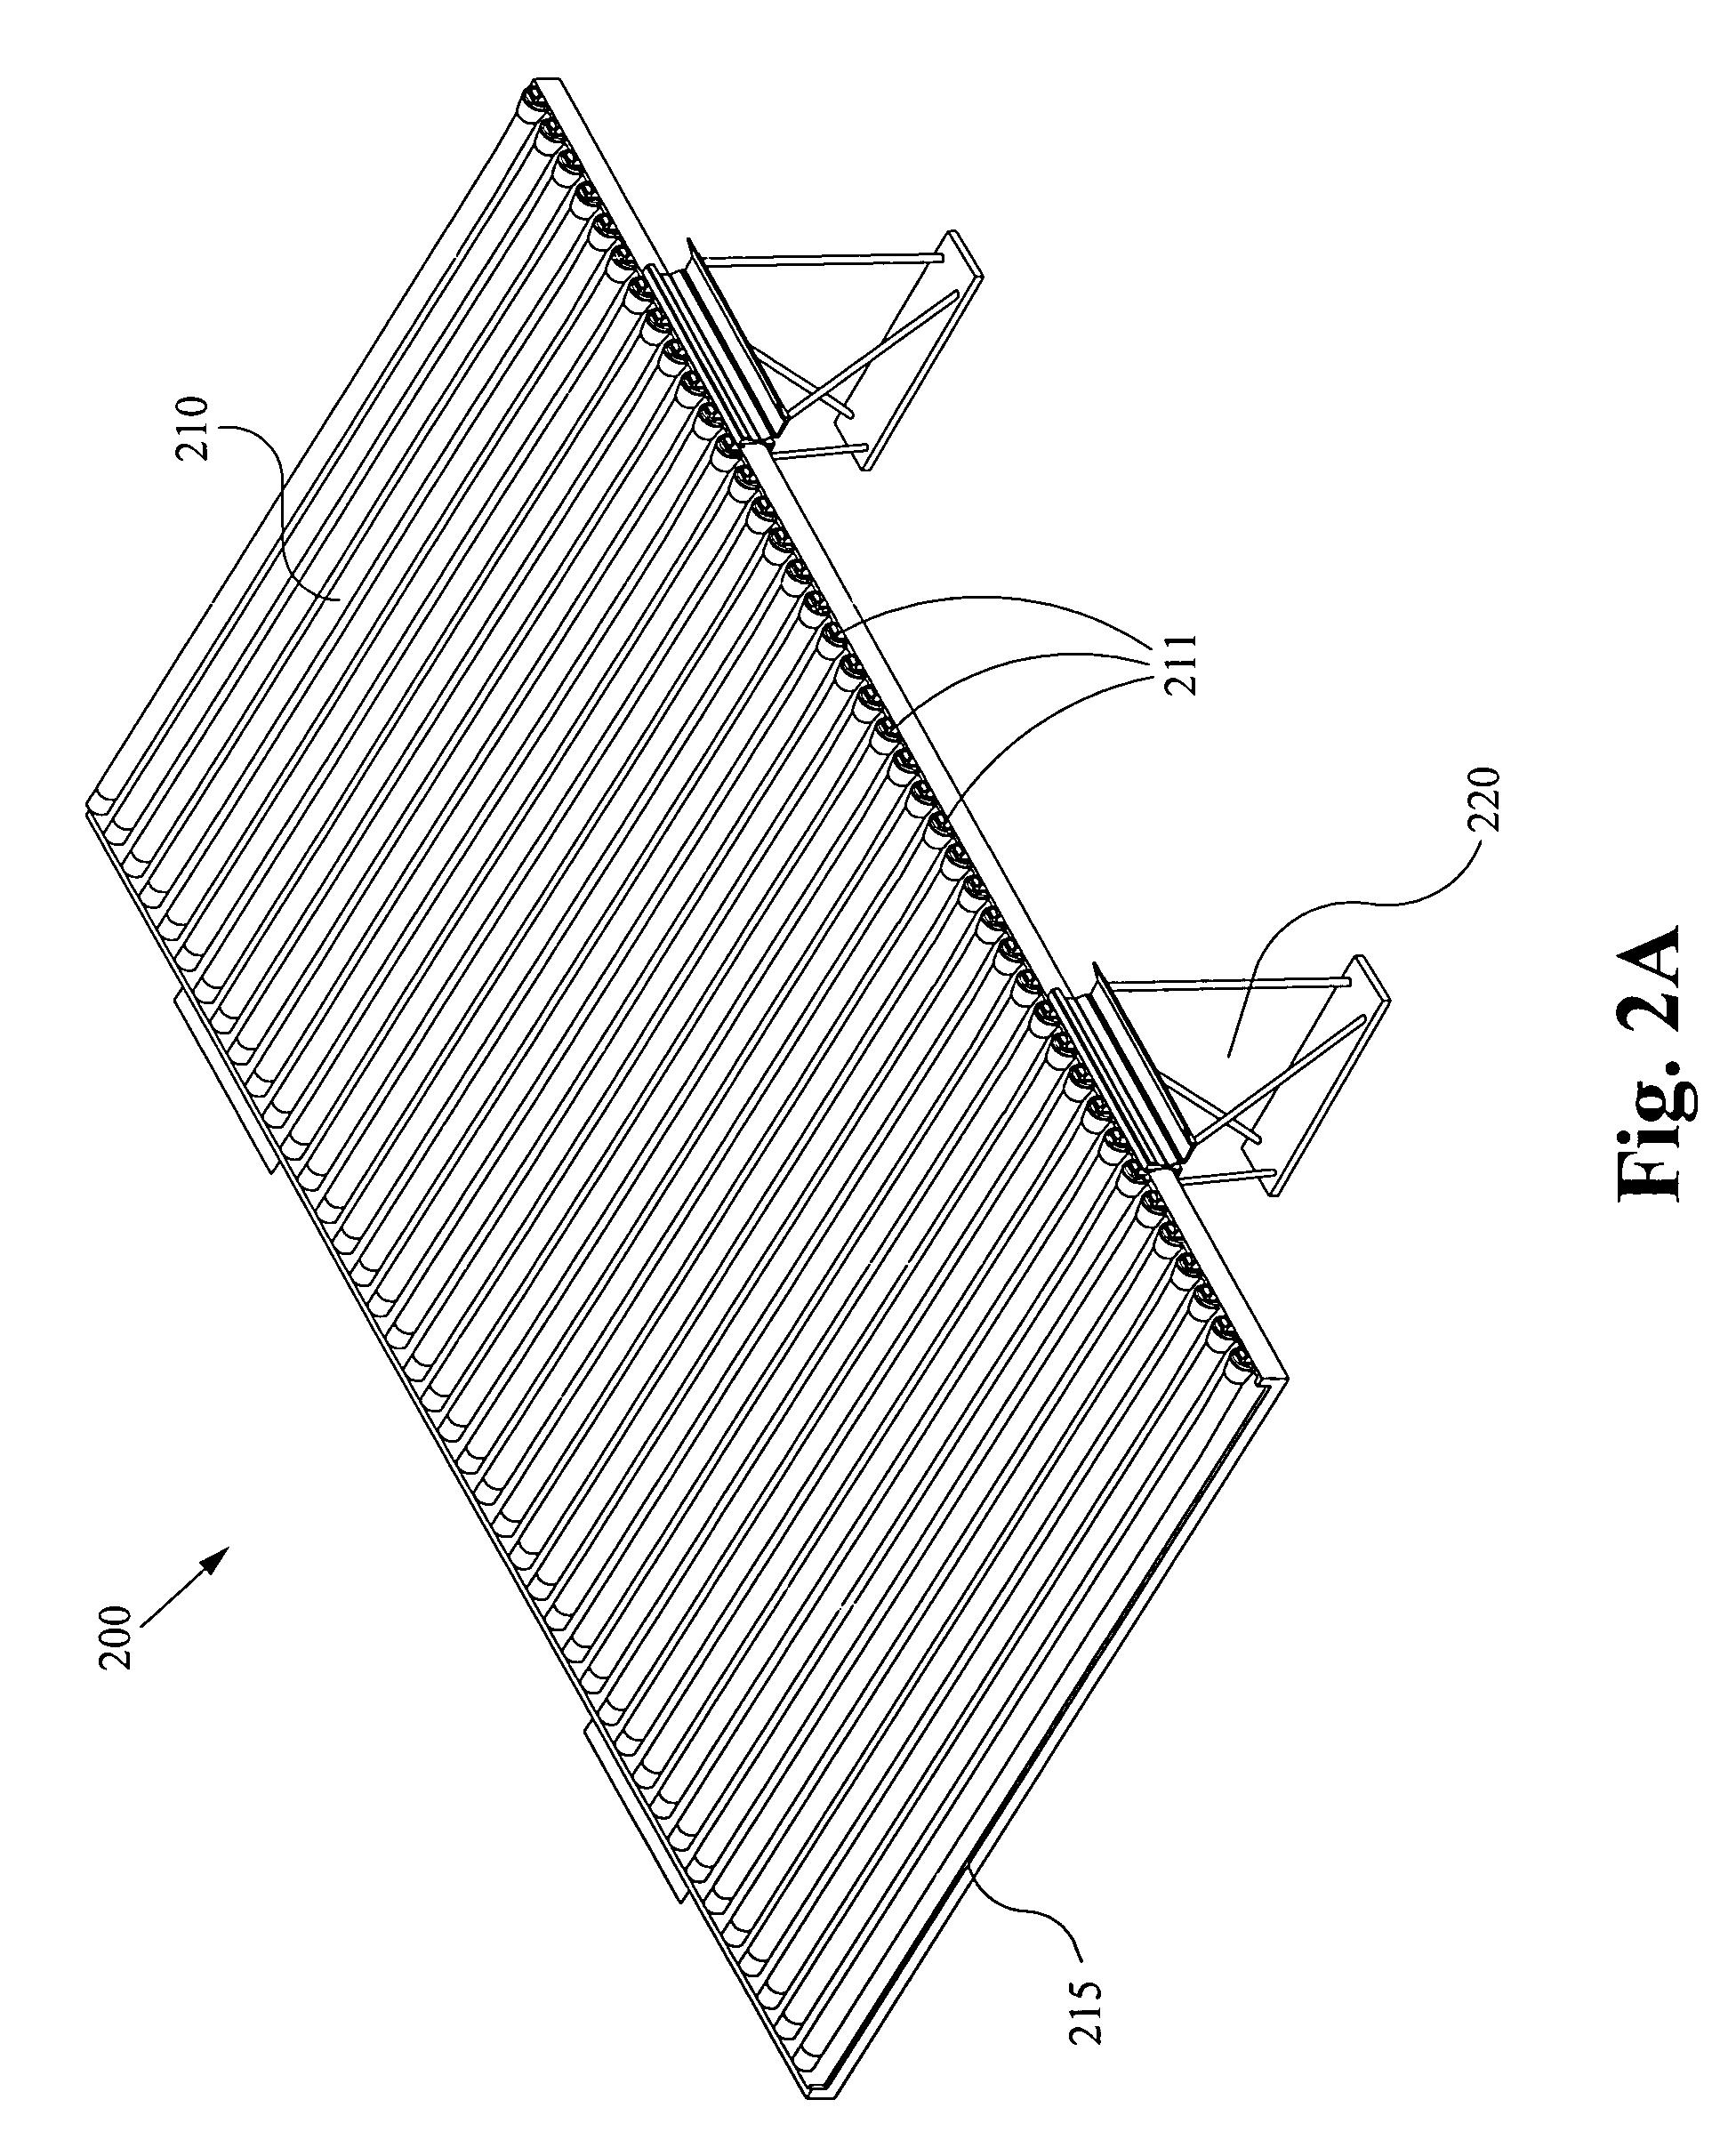 Support system for solar energy generator panels